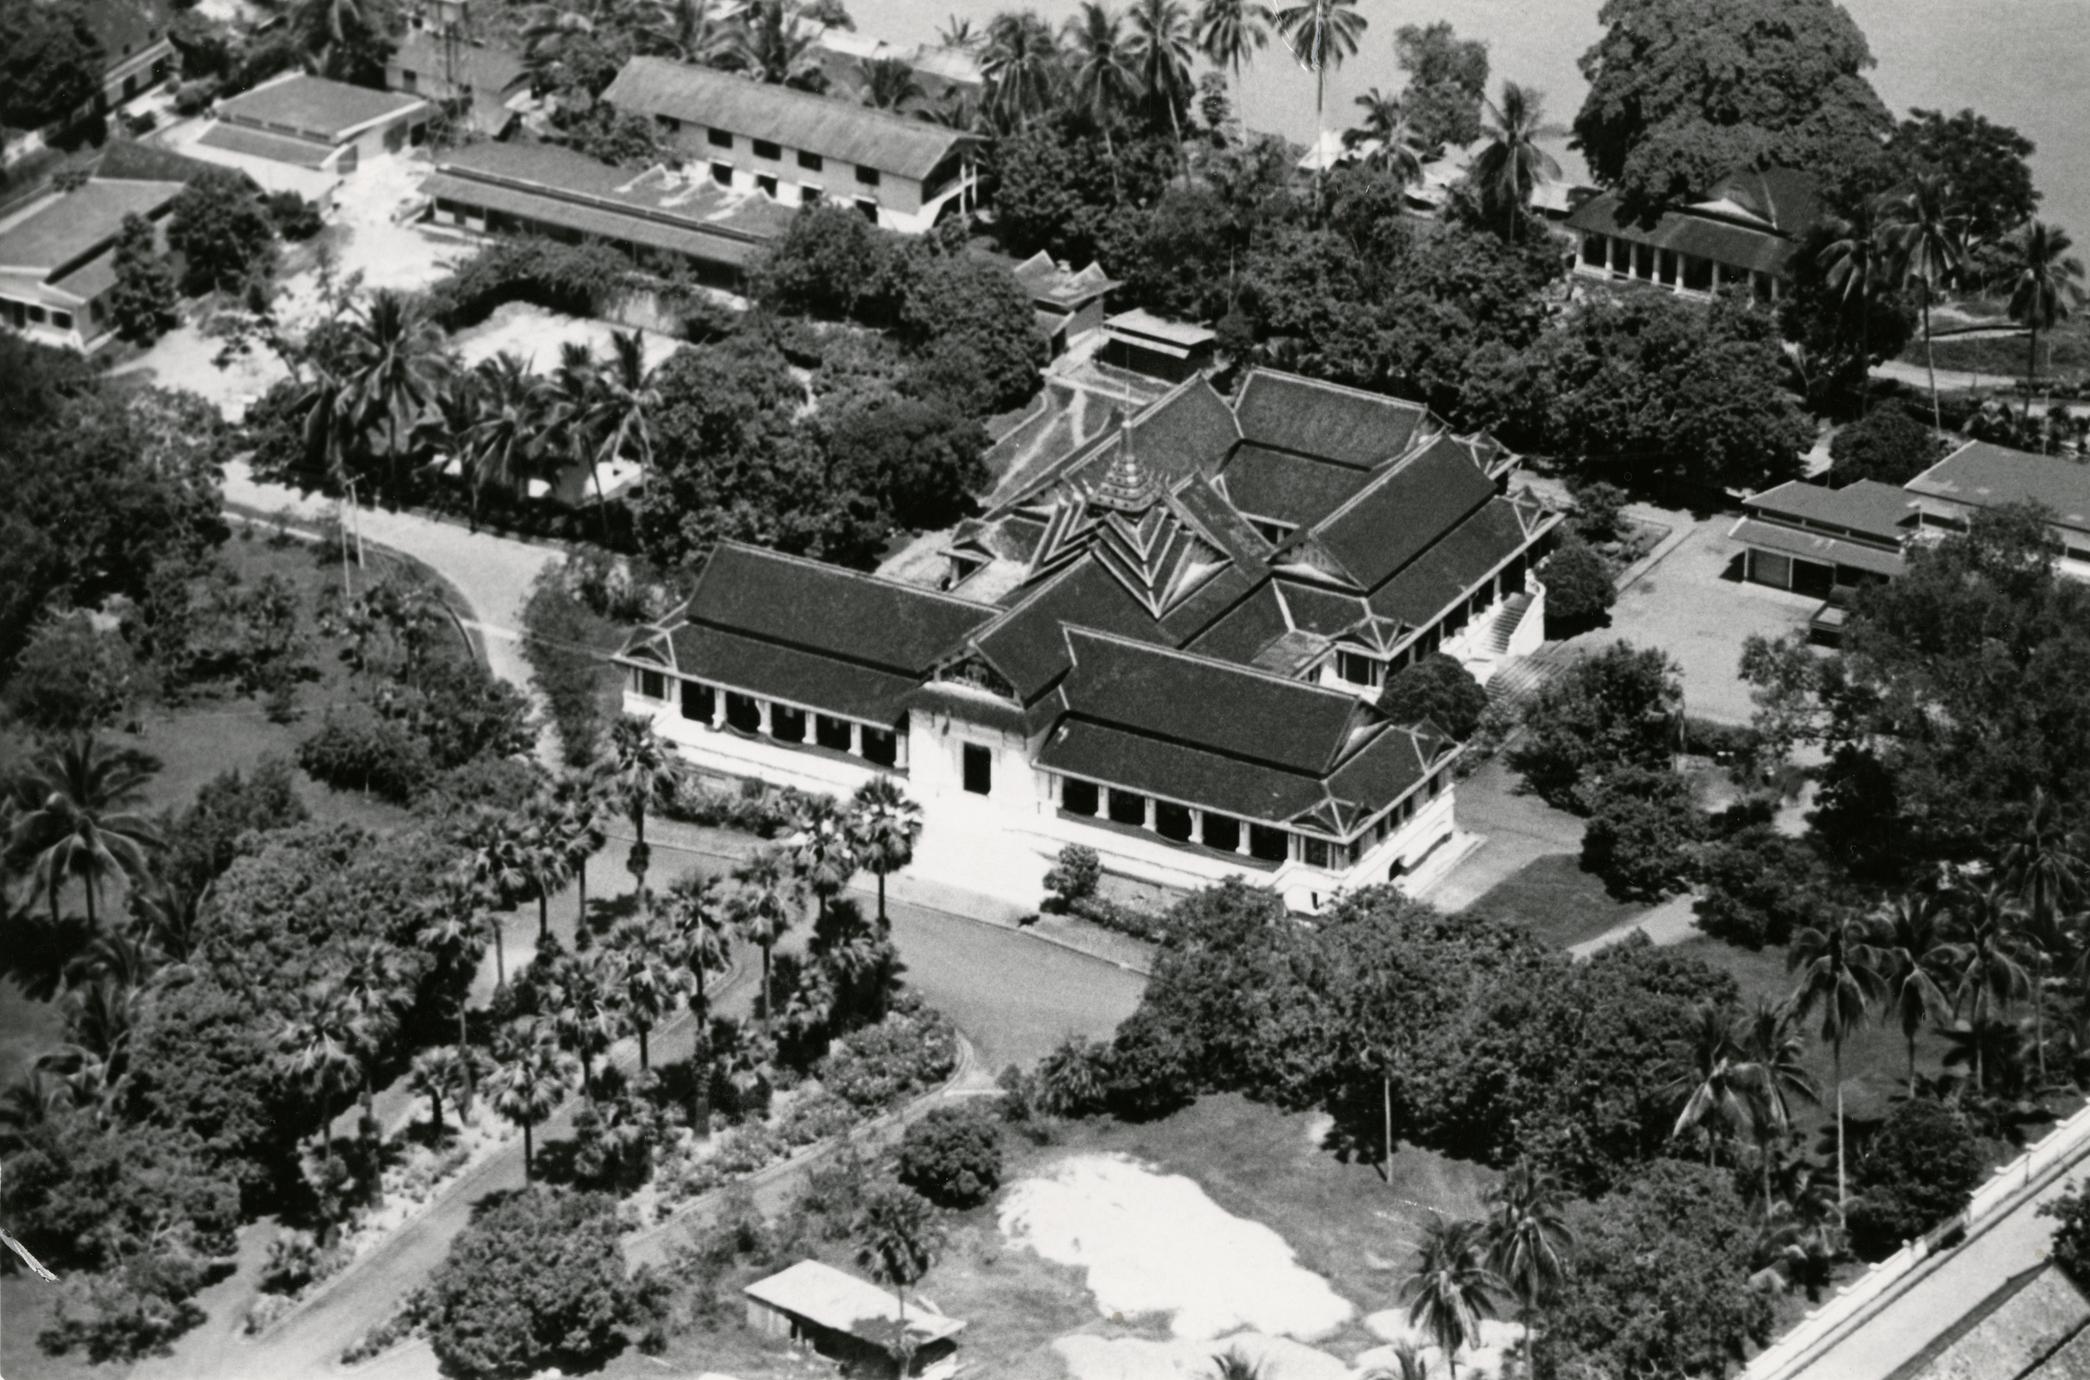 Aerial view of the Royal Palace in the city of Luang Prabang in Luang Prabang Province